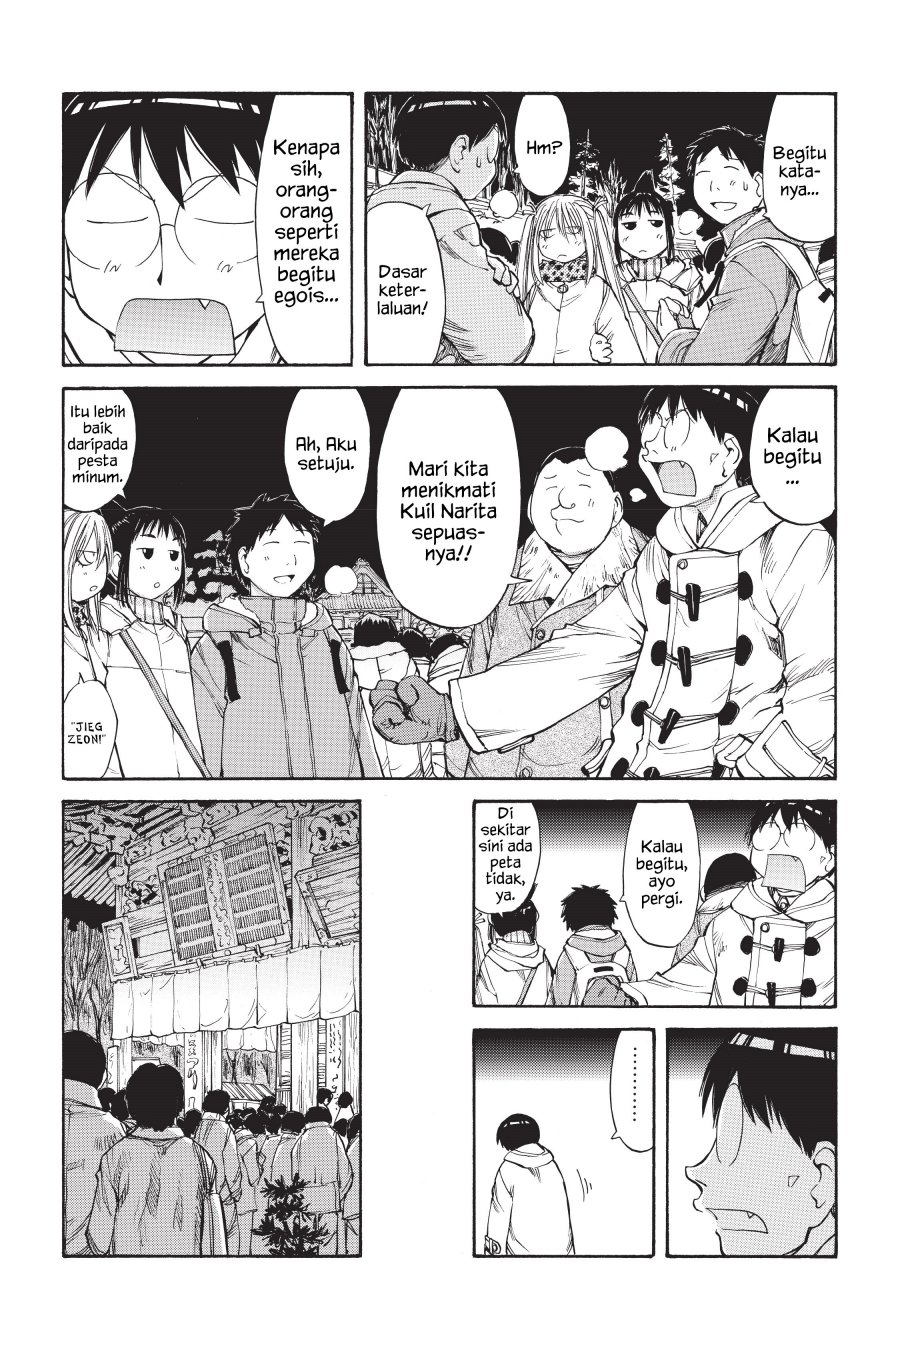 Genshiken – The Society for the Study of Modern Visual Culture Chapter 51 Image 8